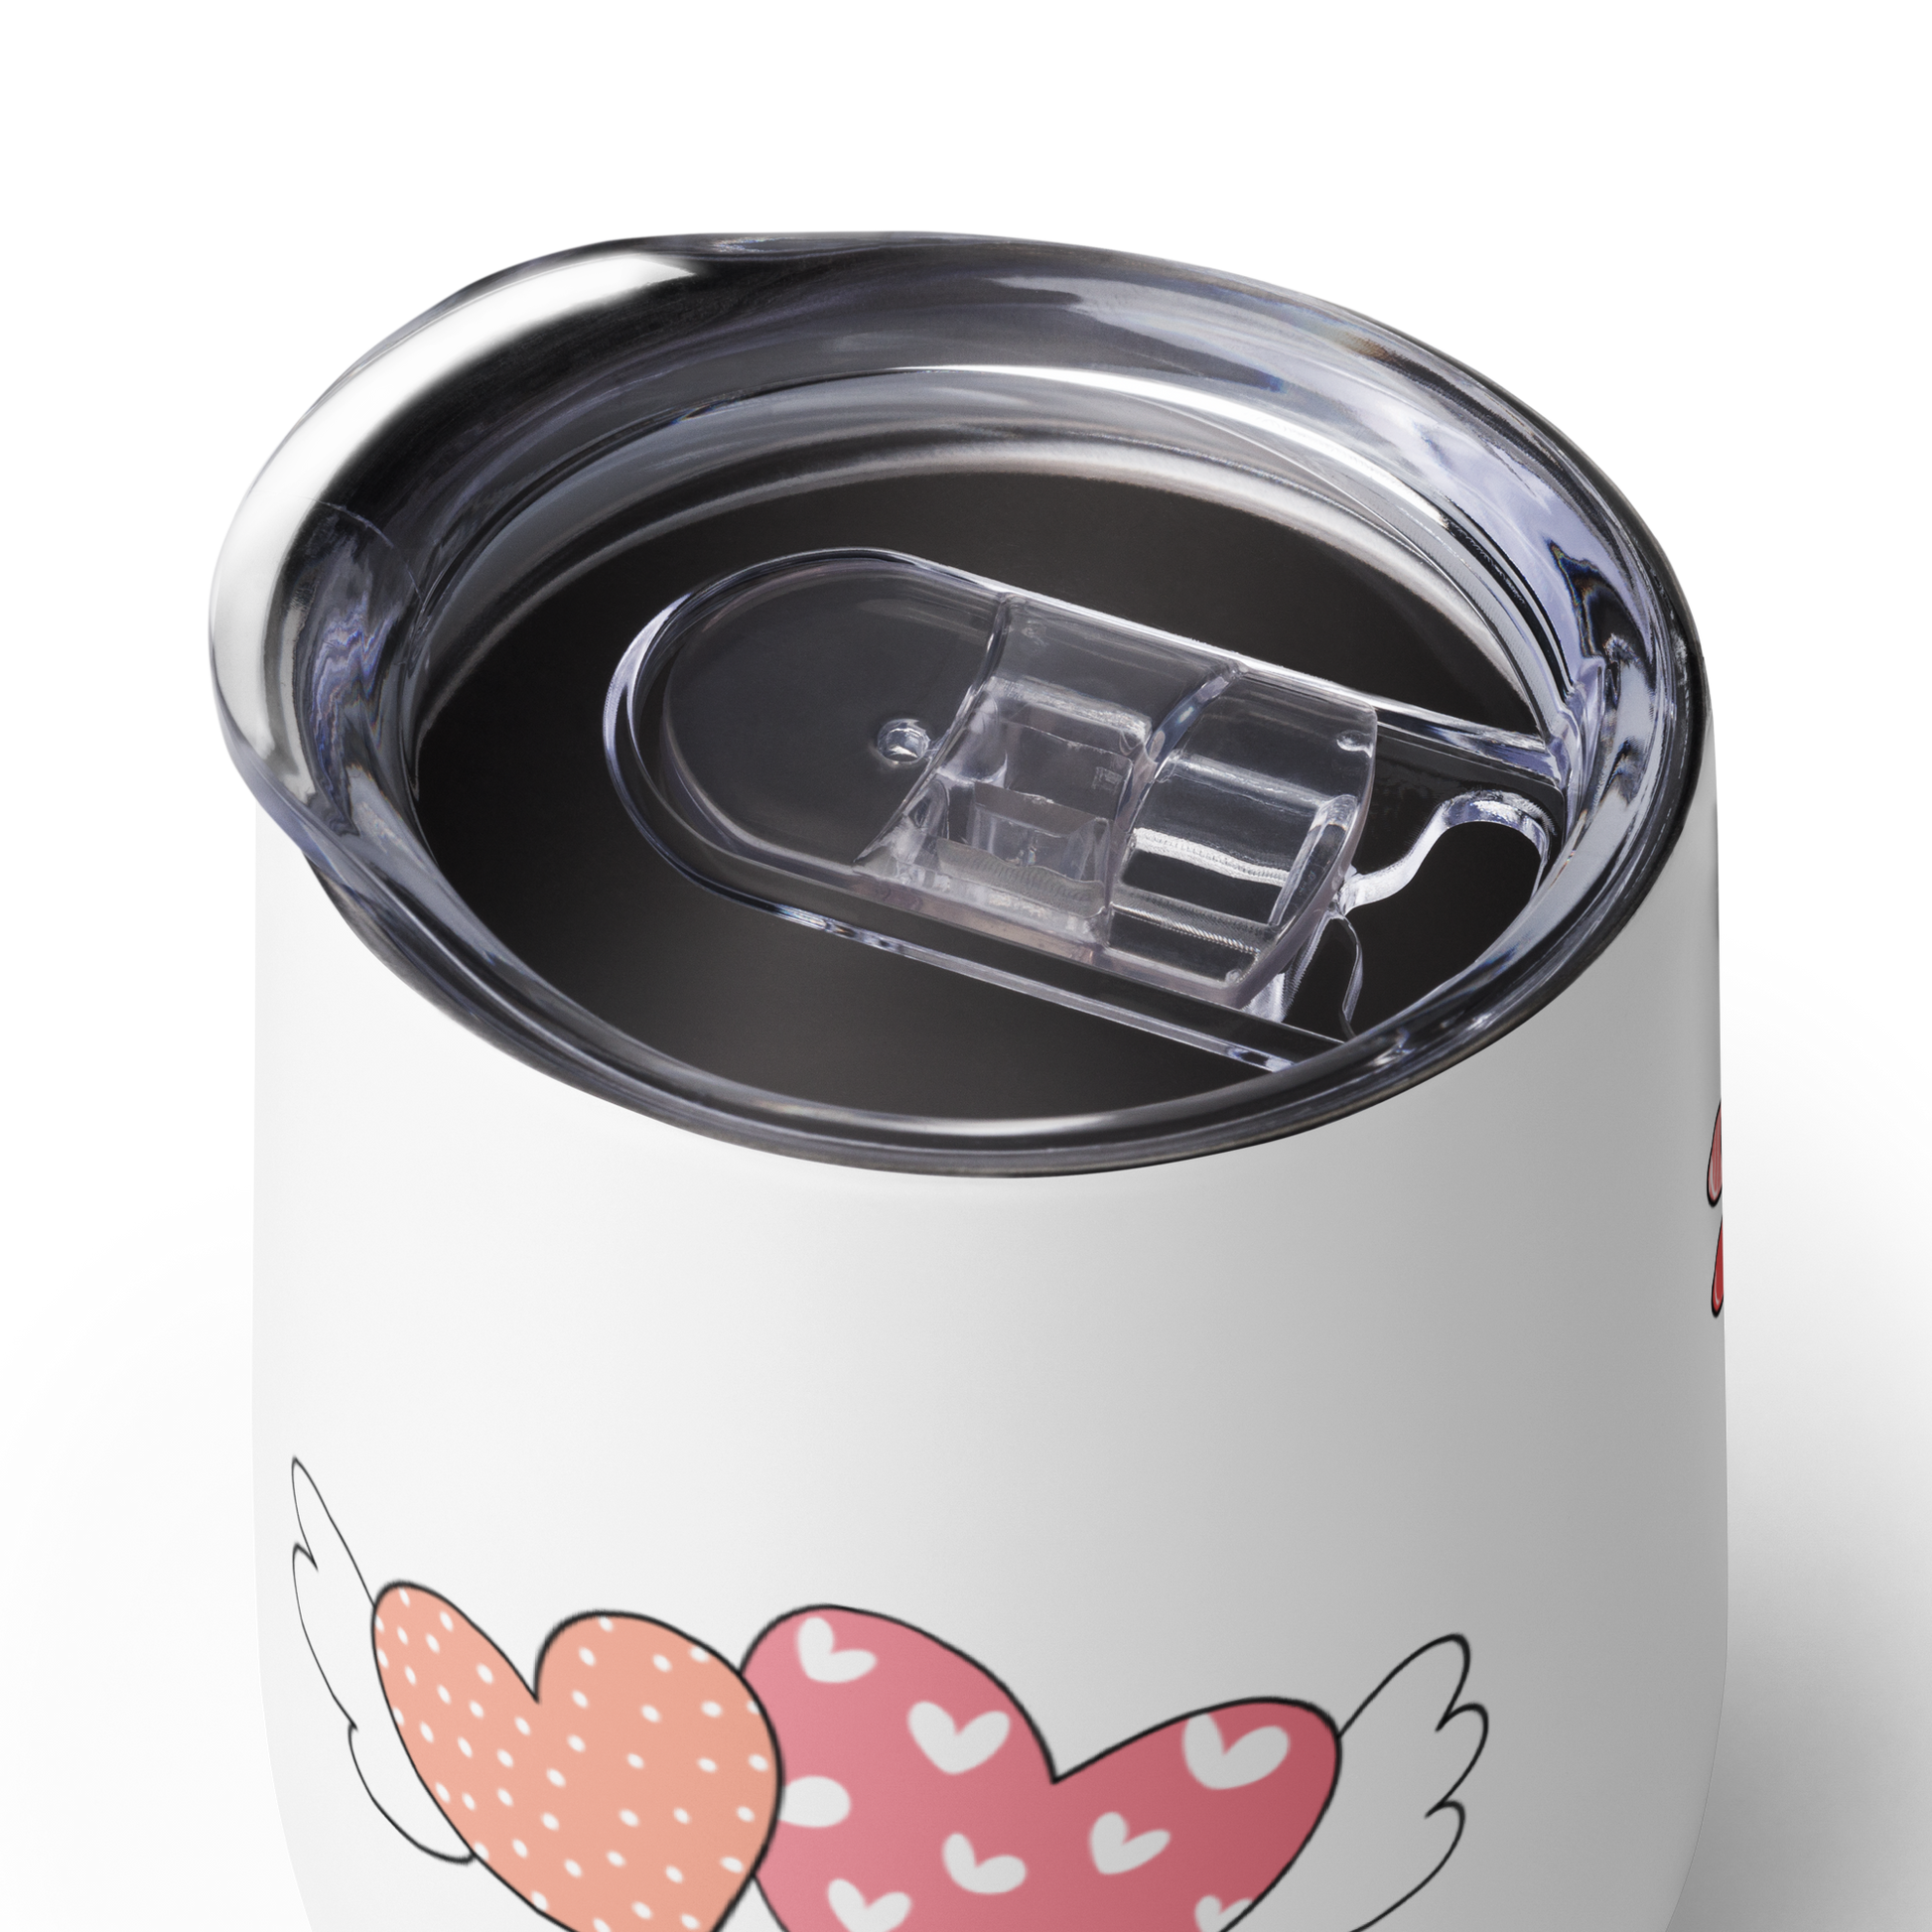 Lovey Dovey Gnomies Wine Tumbler – Sip and Share the Love! - Expressive DeZien 